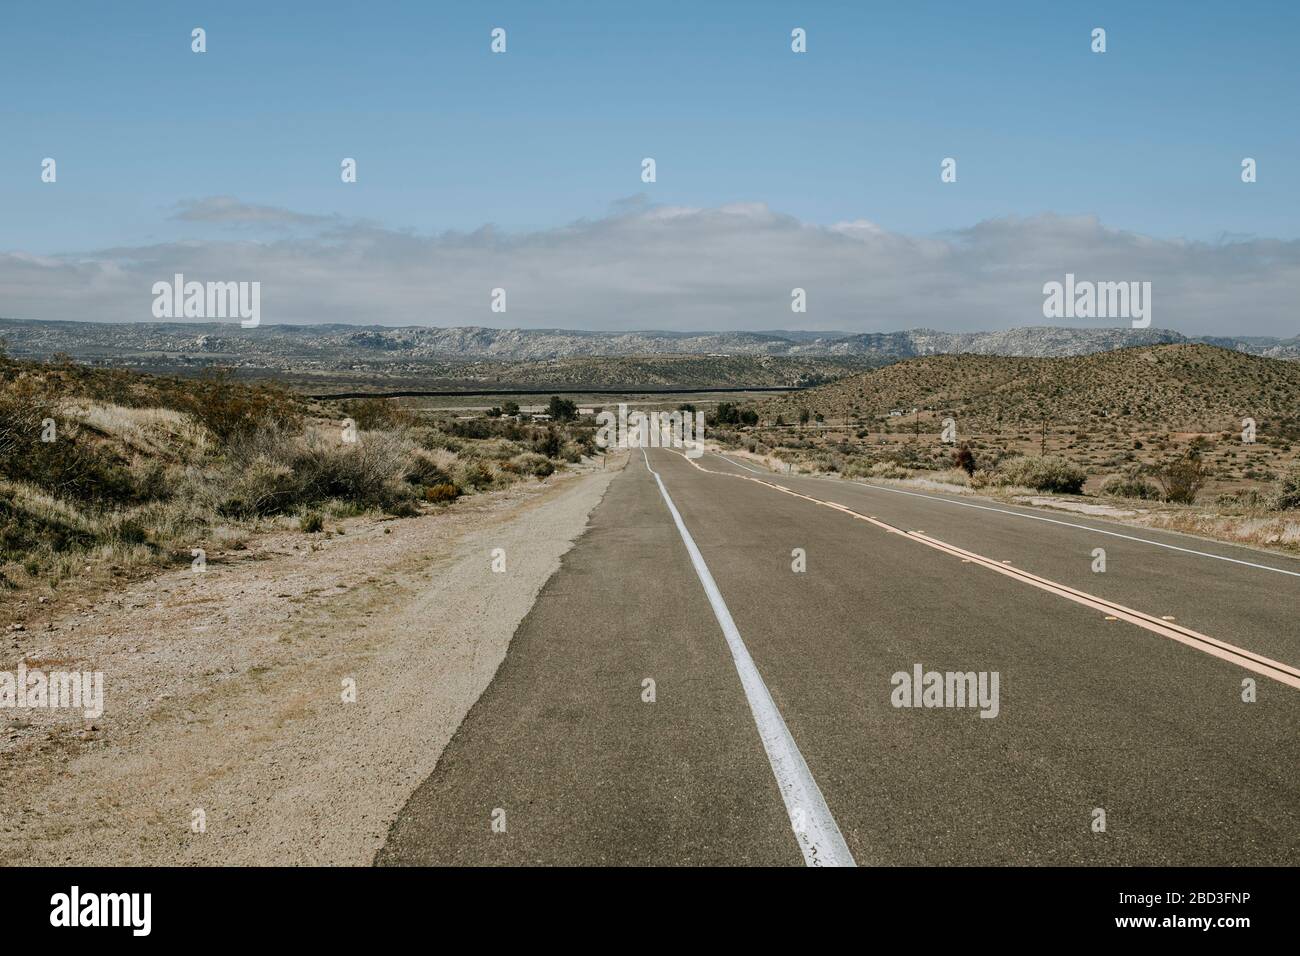 Lonely road with US Mexico border wall in distance near Jacumba, CA Stock Photo